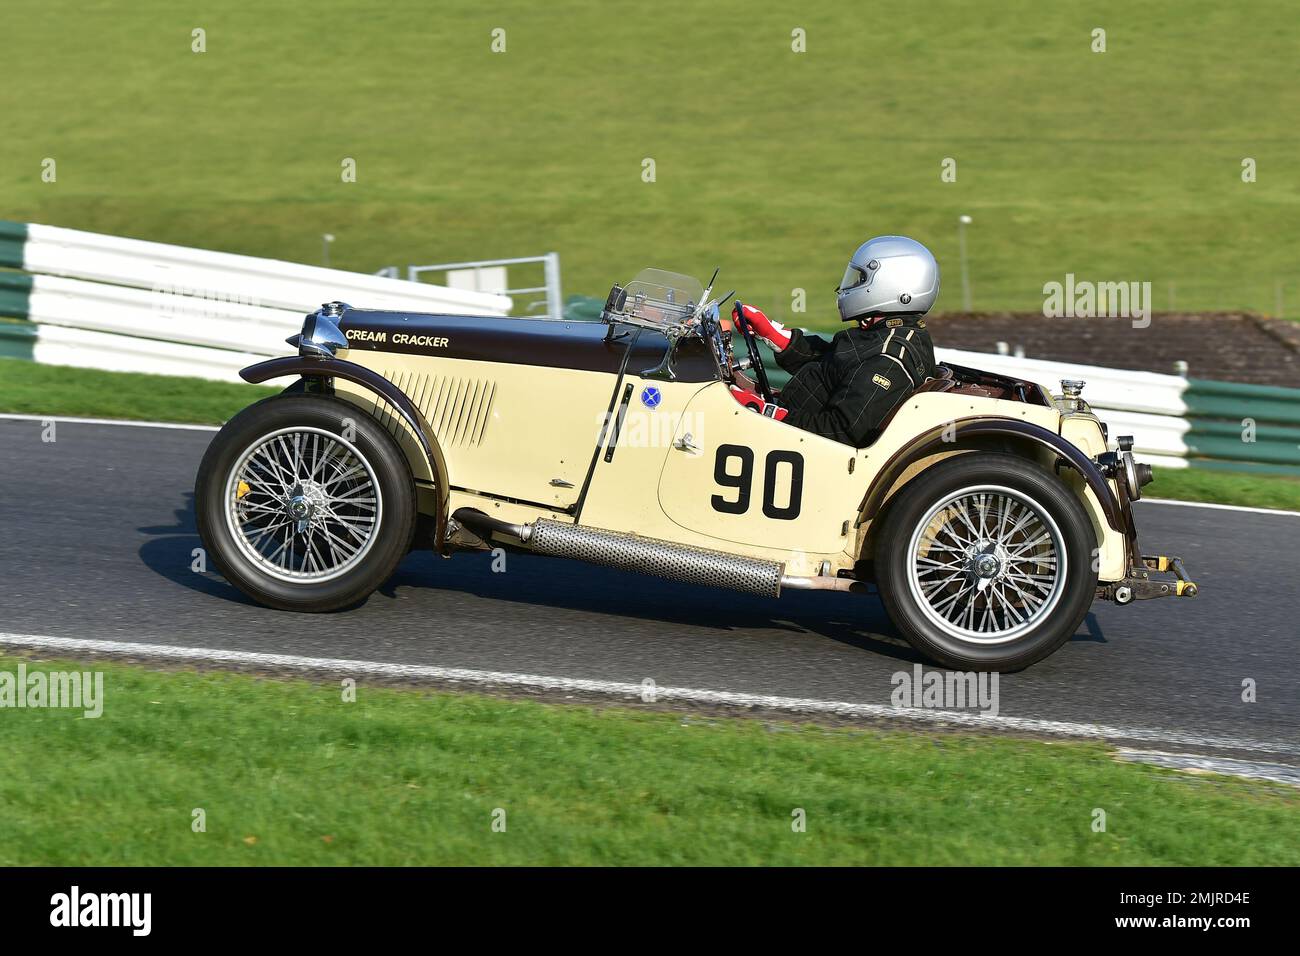 Andy King, MG PB Cream Cracker, Triple M Register Race for Pre-War MG Cars, fifteen minutes of racing for iconic MG Midget, Magna and Magnette (hence Stock Photo